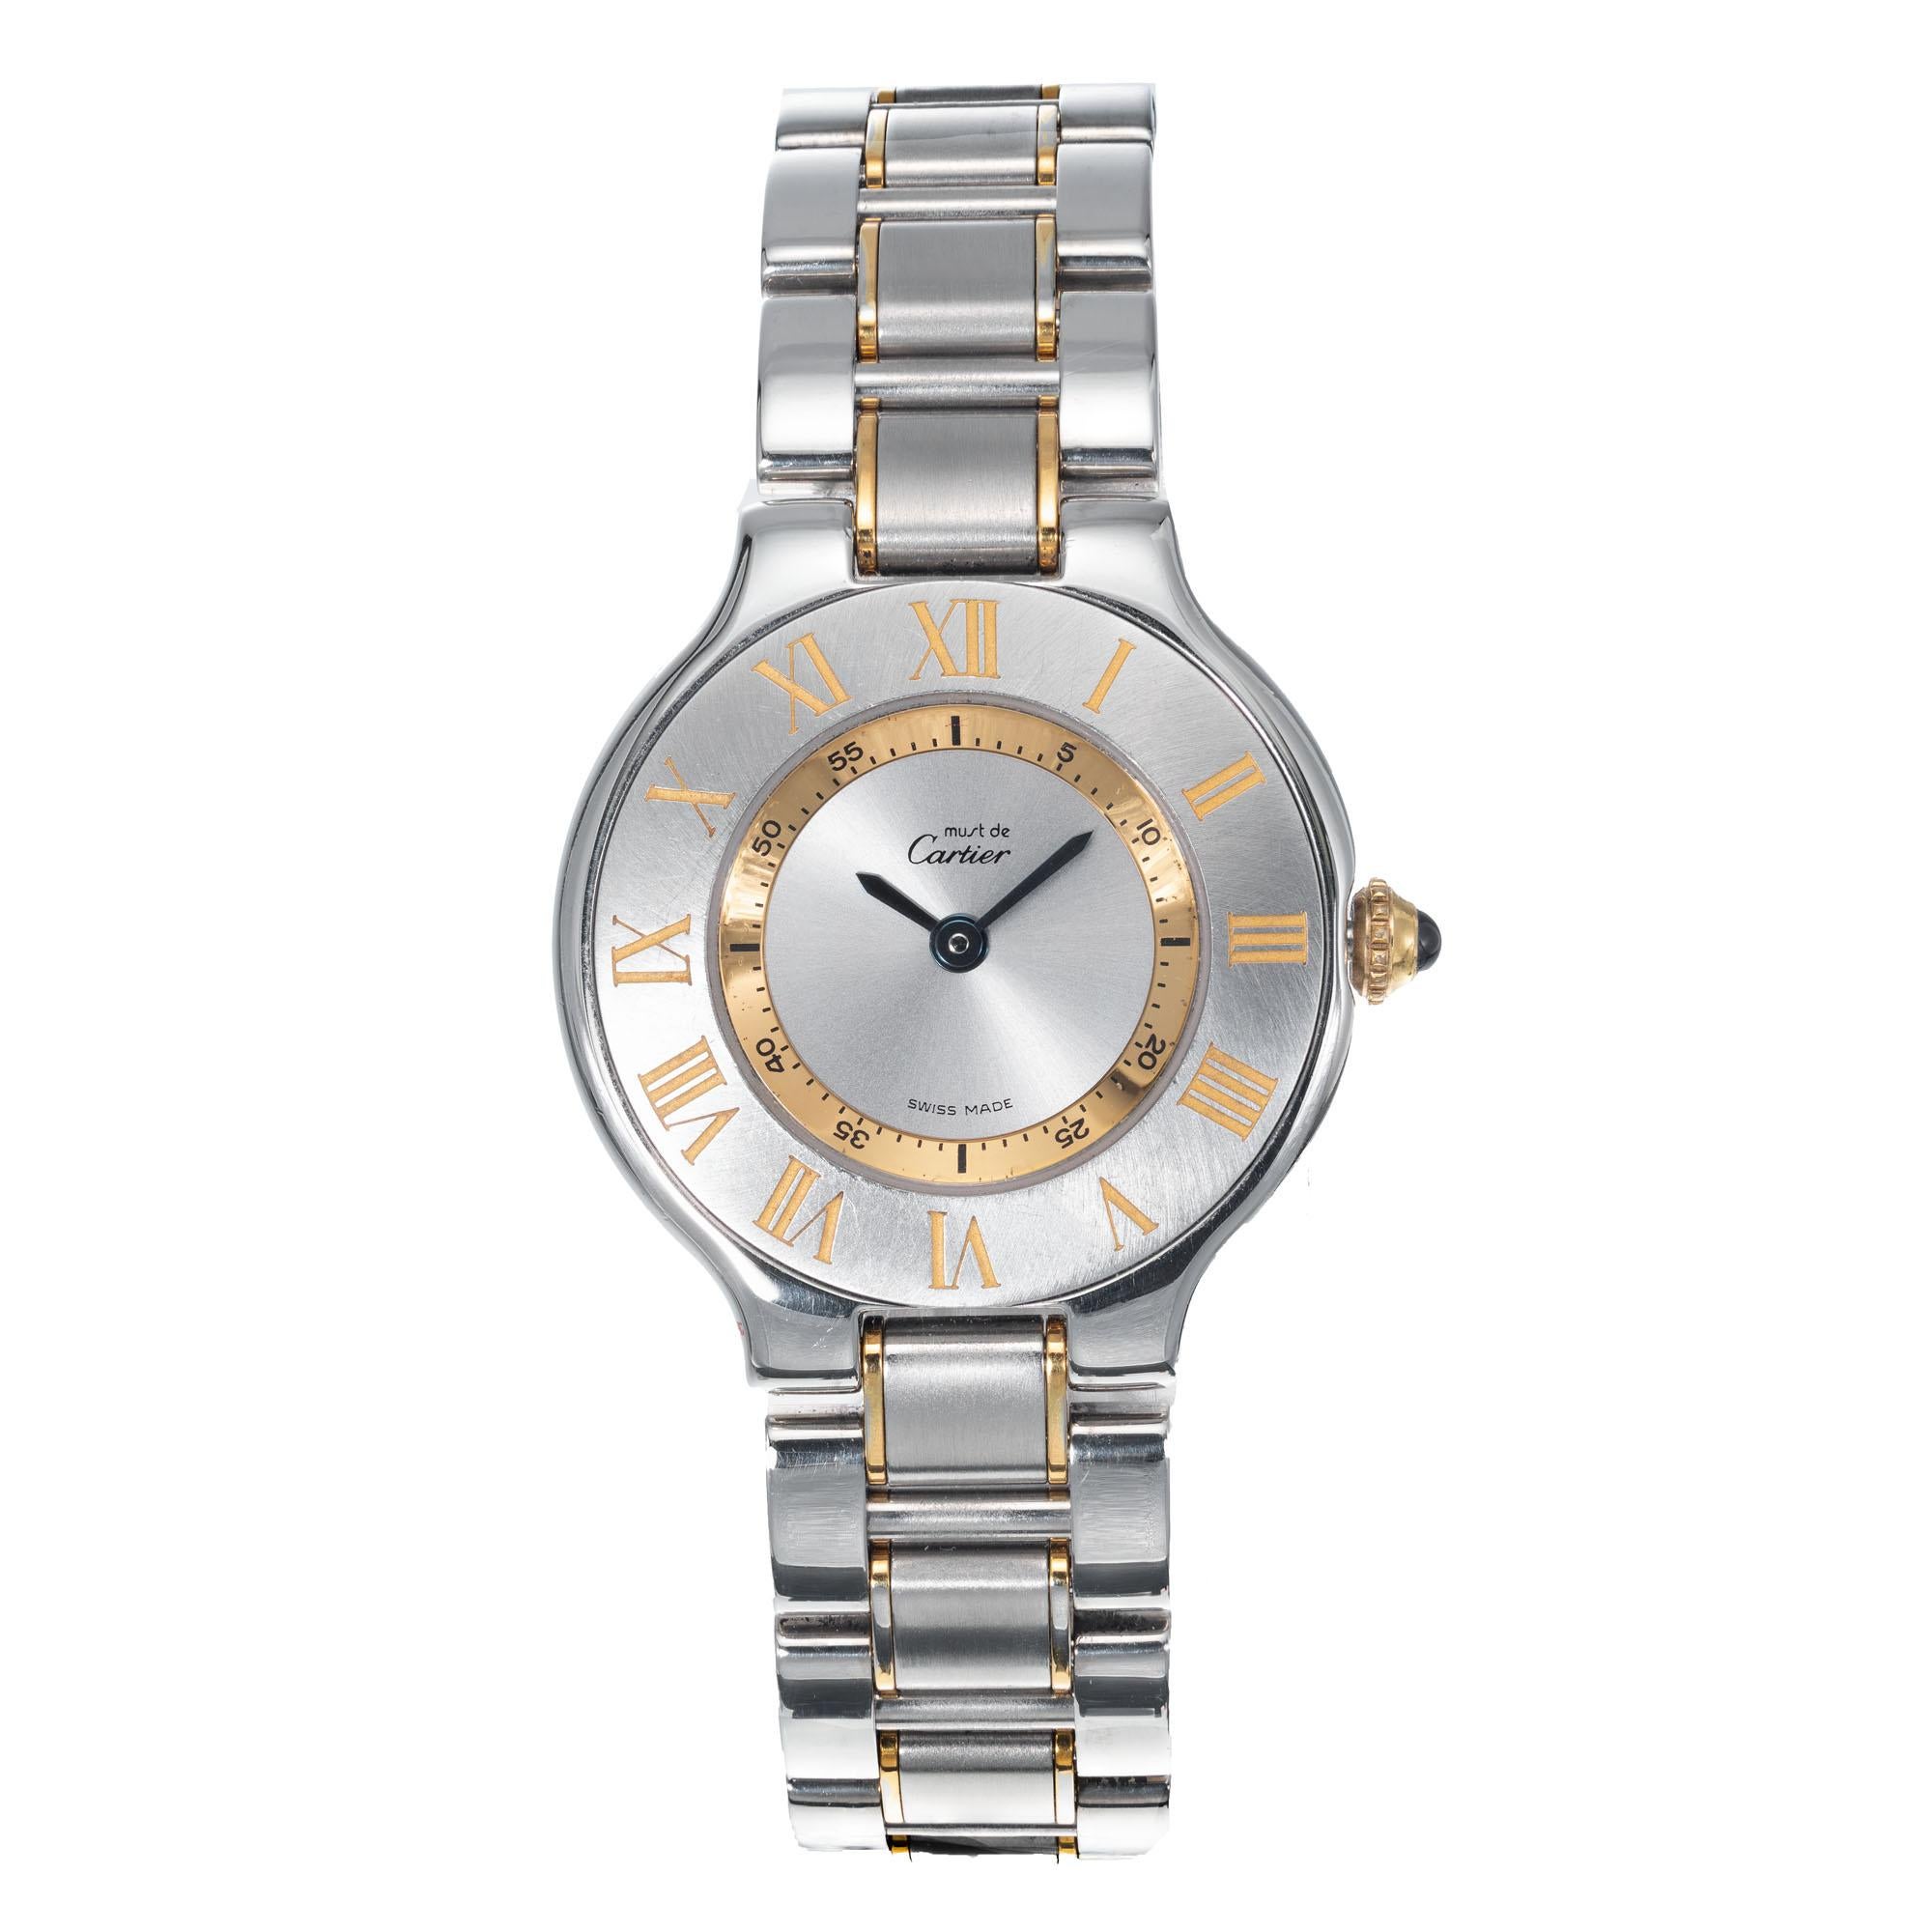  Ladies Must De Cartier wristwatch in steel and 18k gold plate. Cartier Quartz movement.

61.4 grams 
Steel & 18k gold plate 
Band length: 7 inches – can be shortened 
Length: 31mm 
Width: 28mm 
Band width at case: 14mm 
Case thickness: 5.35mm